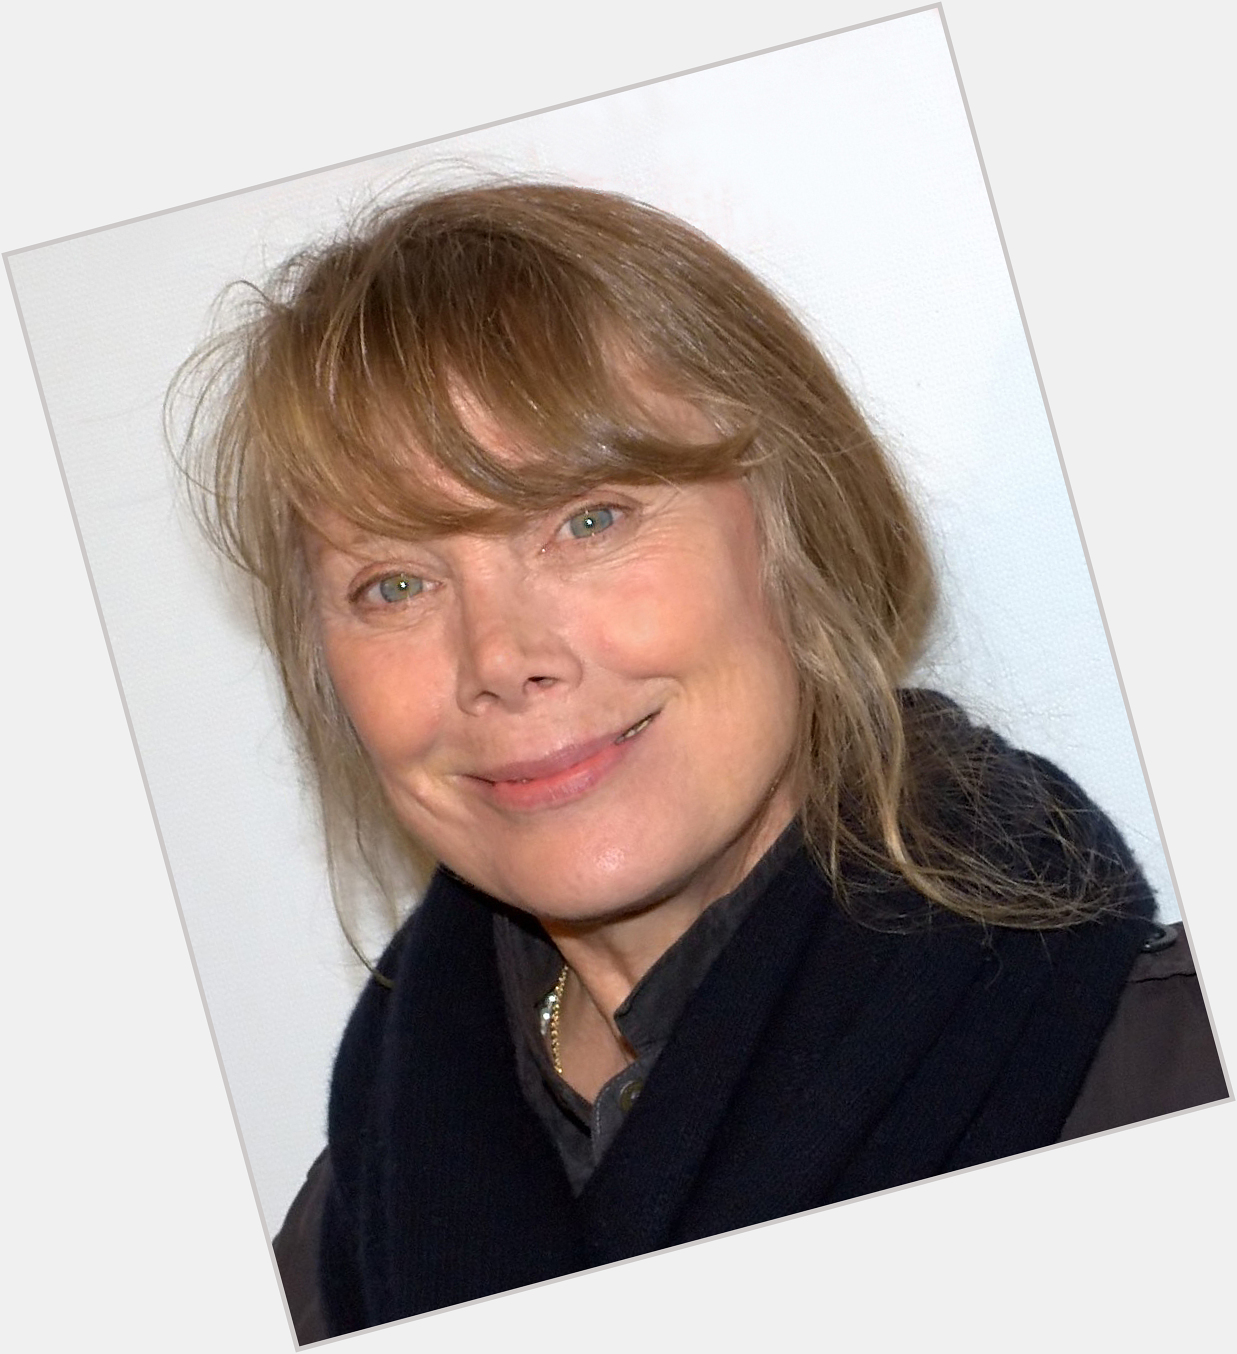 Happy Birthday to actress and singer Sissy Spacek born on December 25, 1949 